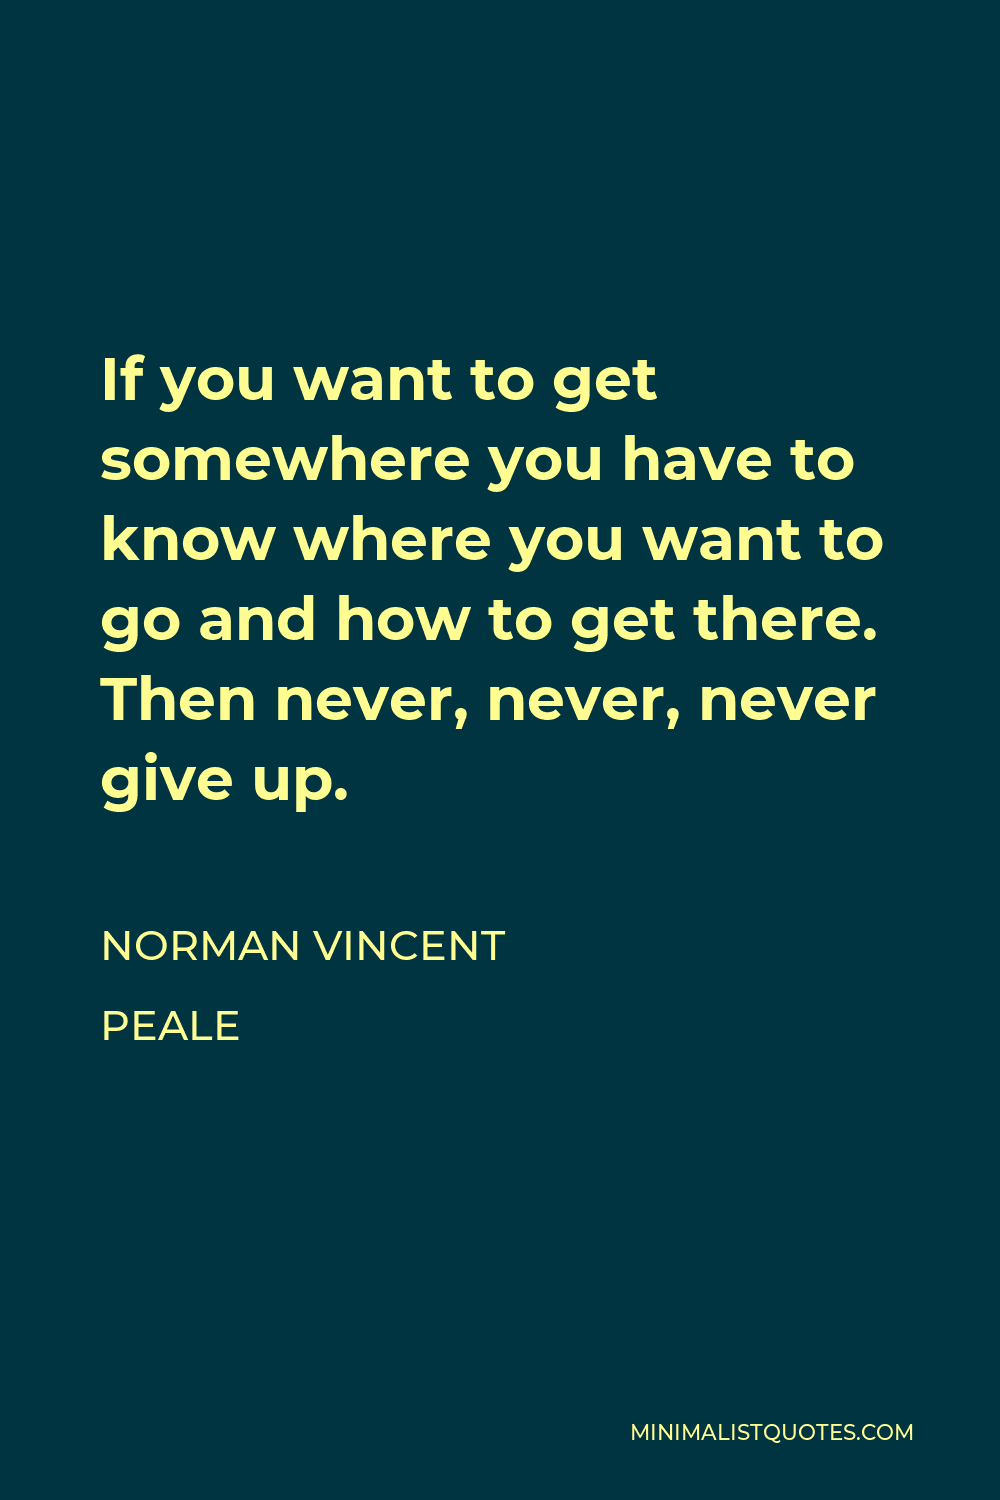 Norman Vincent Peale Quote - If you want to get somewhere you have to know where you want to go and how to get there. Then never, never, never give up.